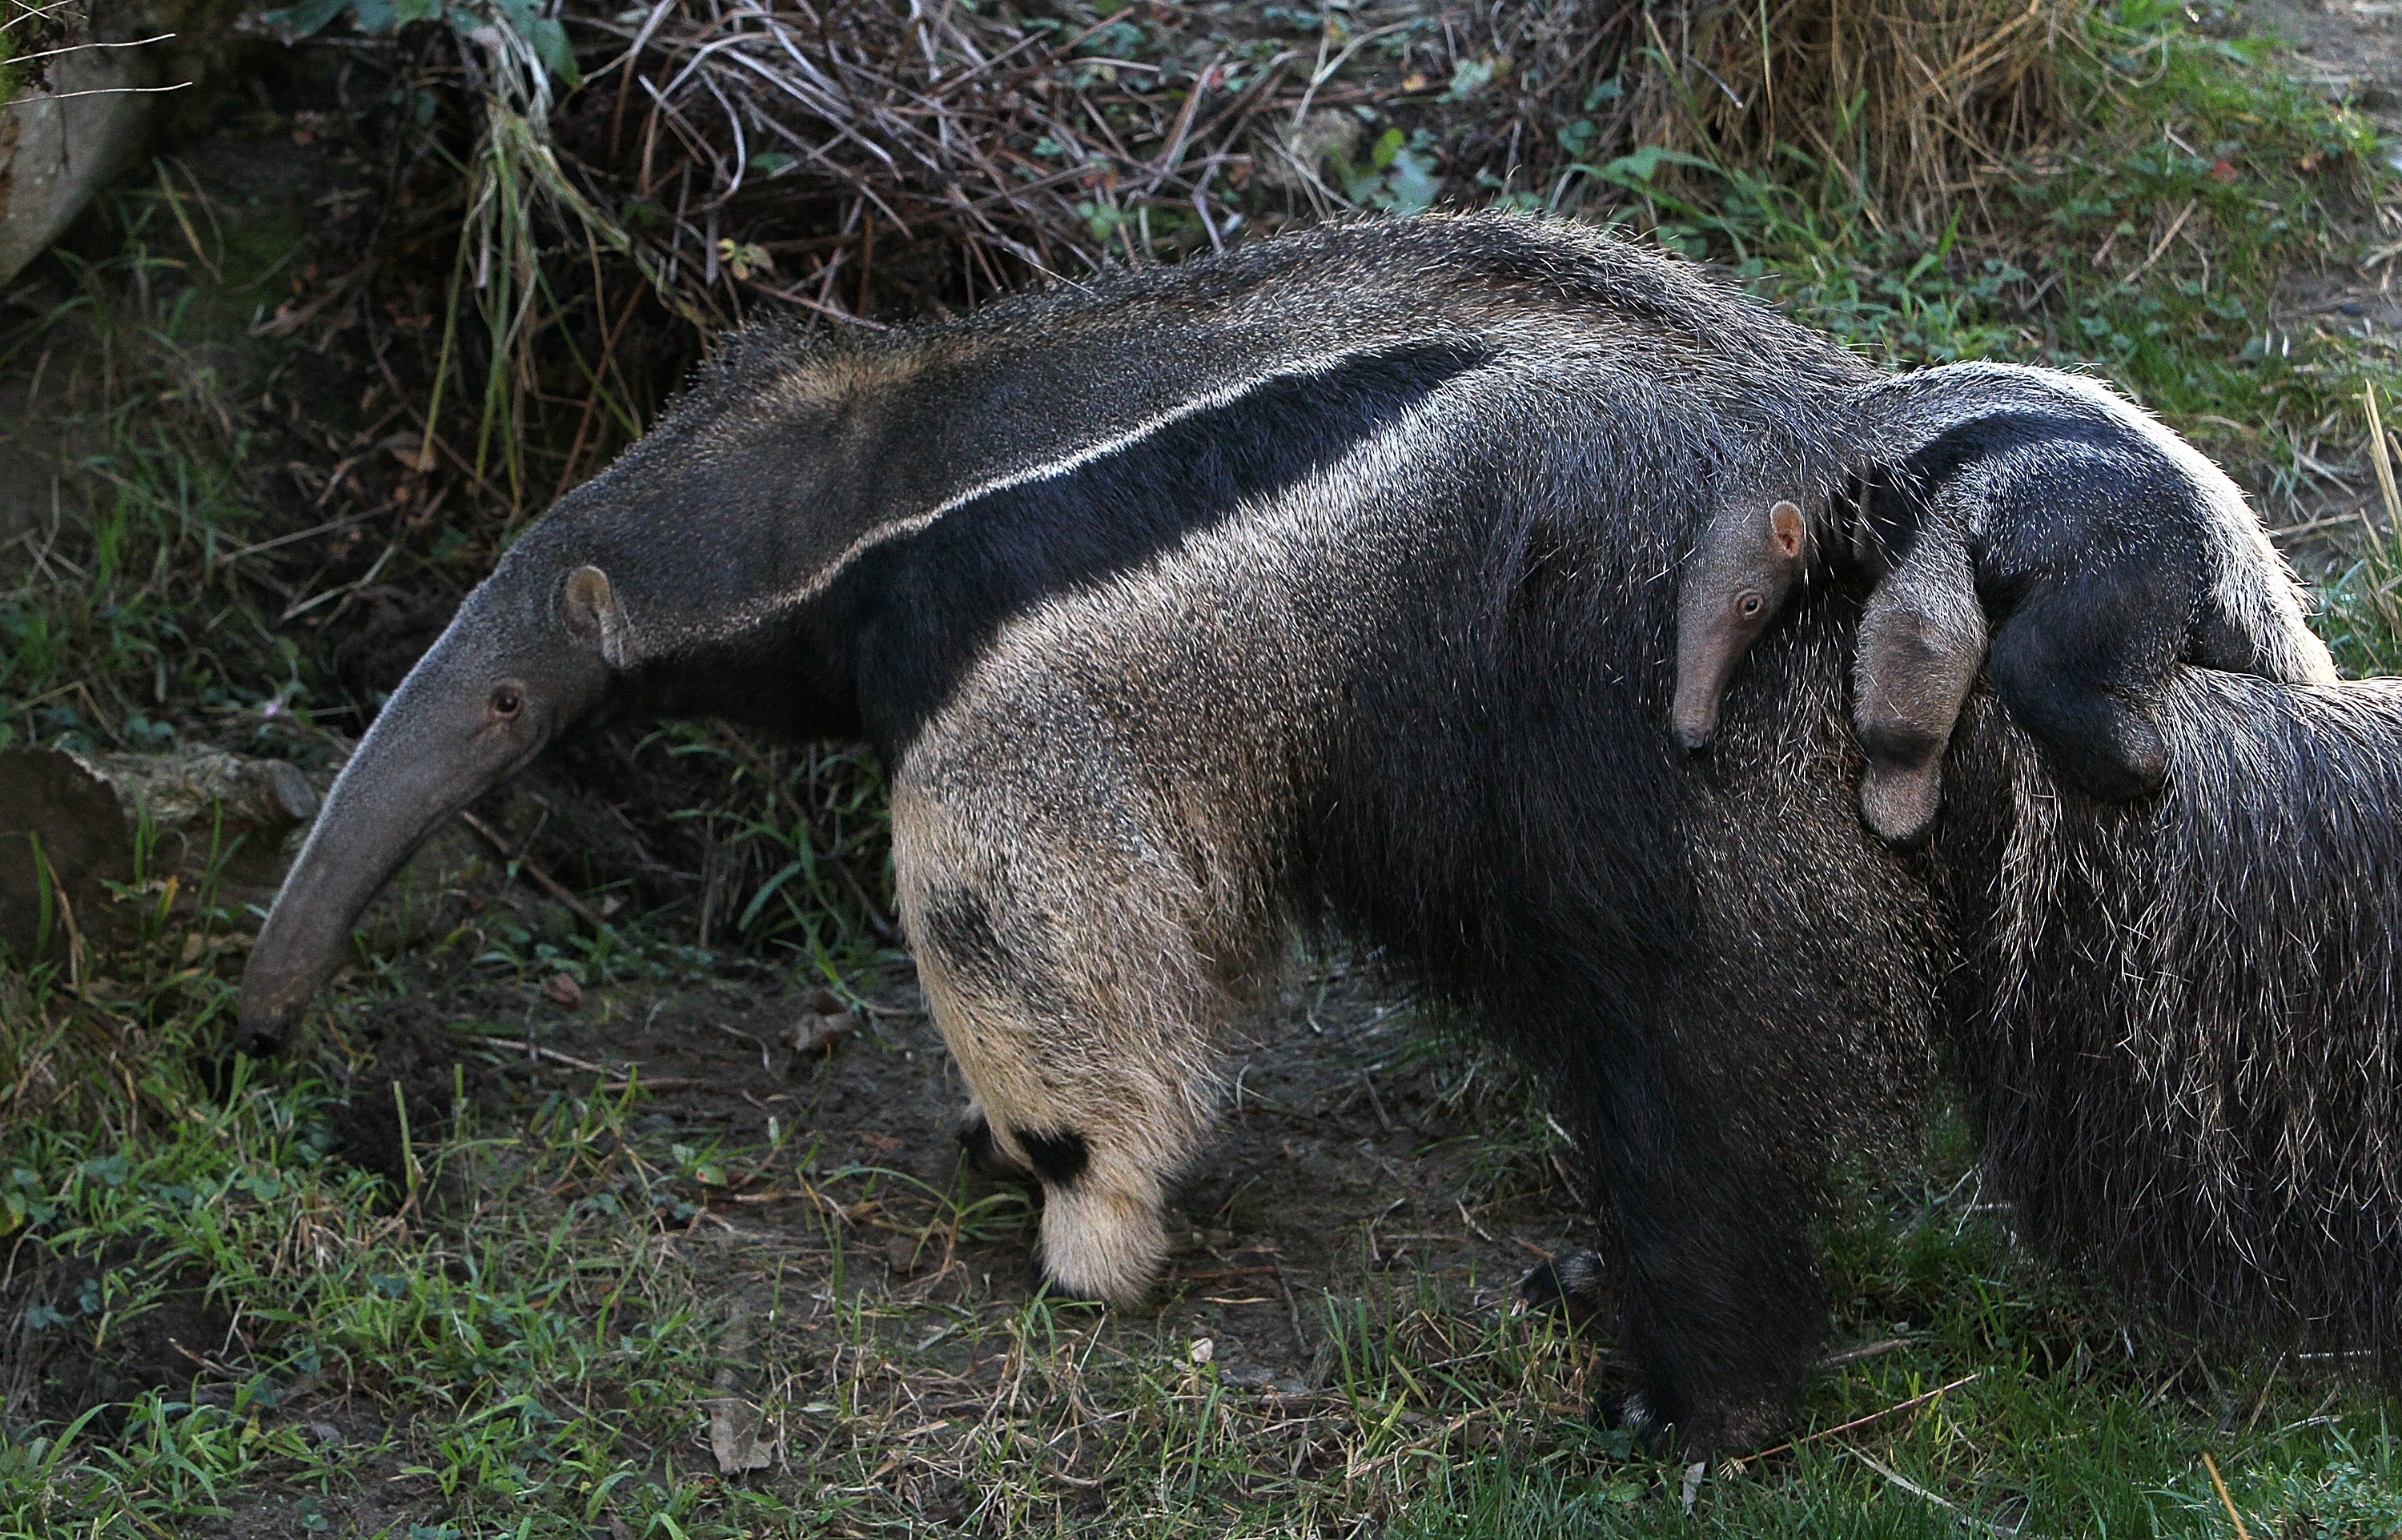 An adult anteater and its infant. (Photo: Justin Sullivan, Getty Images)